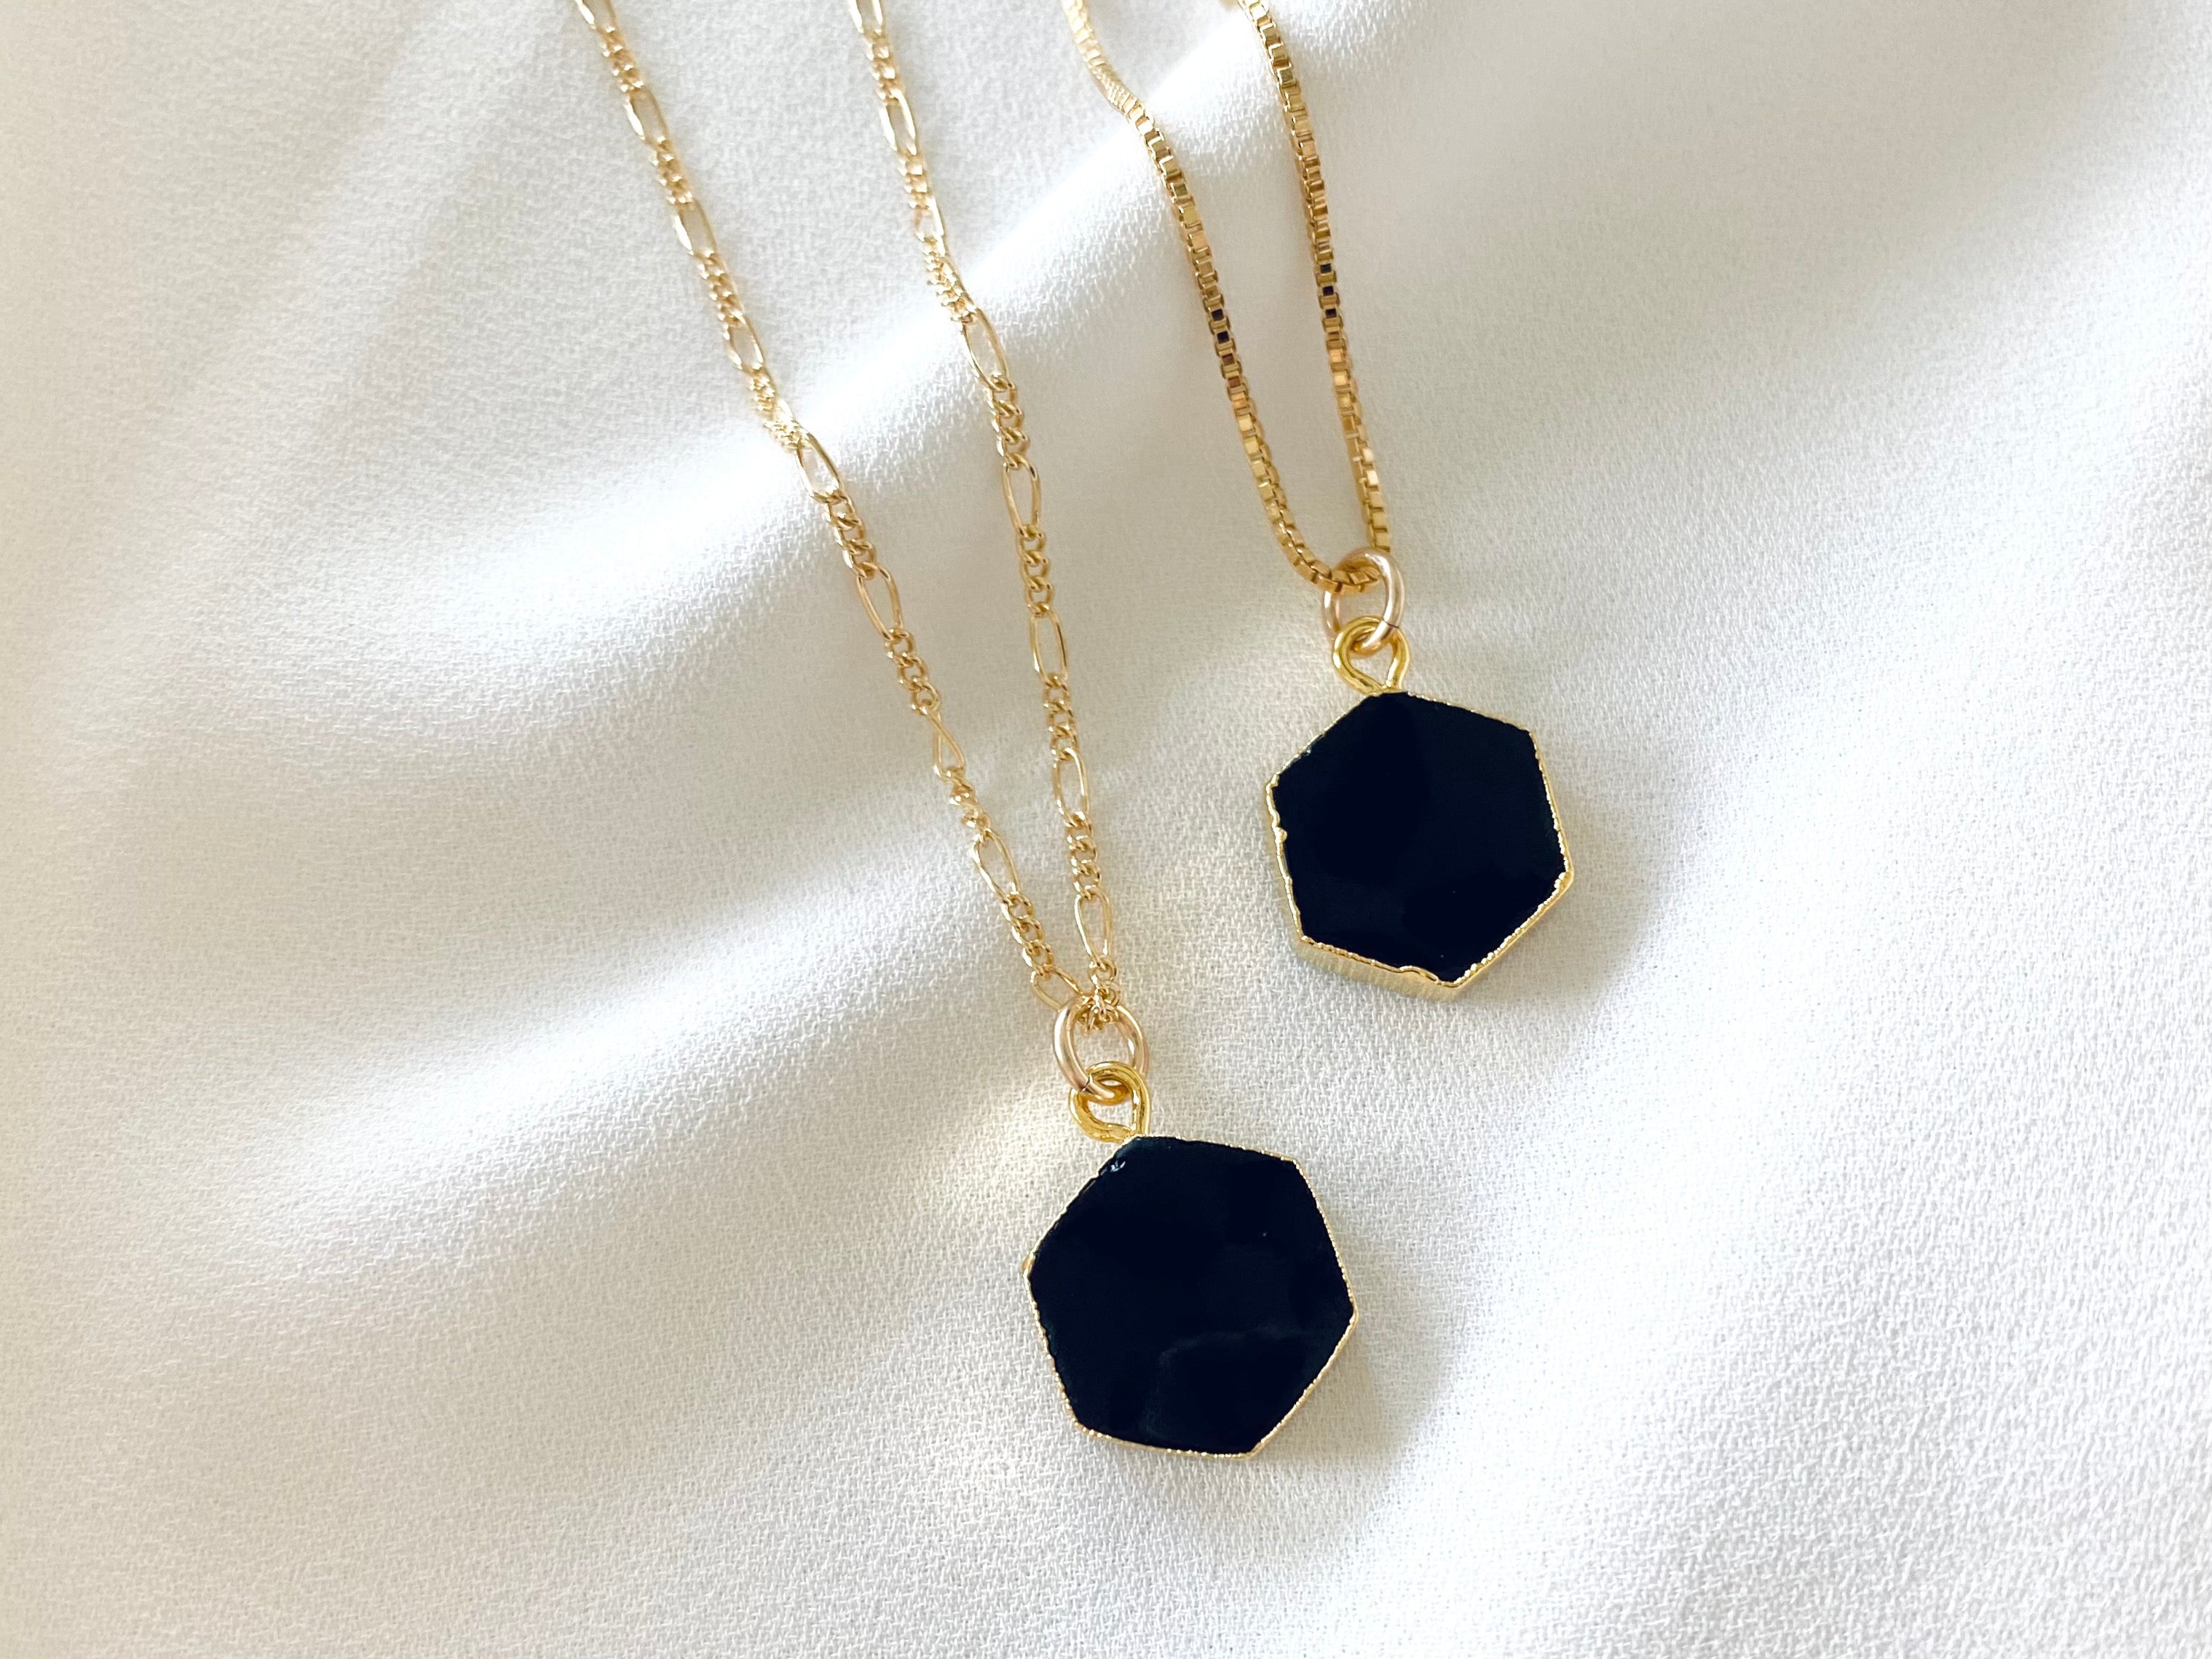 Black Onyx Hexagon Pendant Necklace - Gold Filled Chain